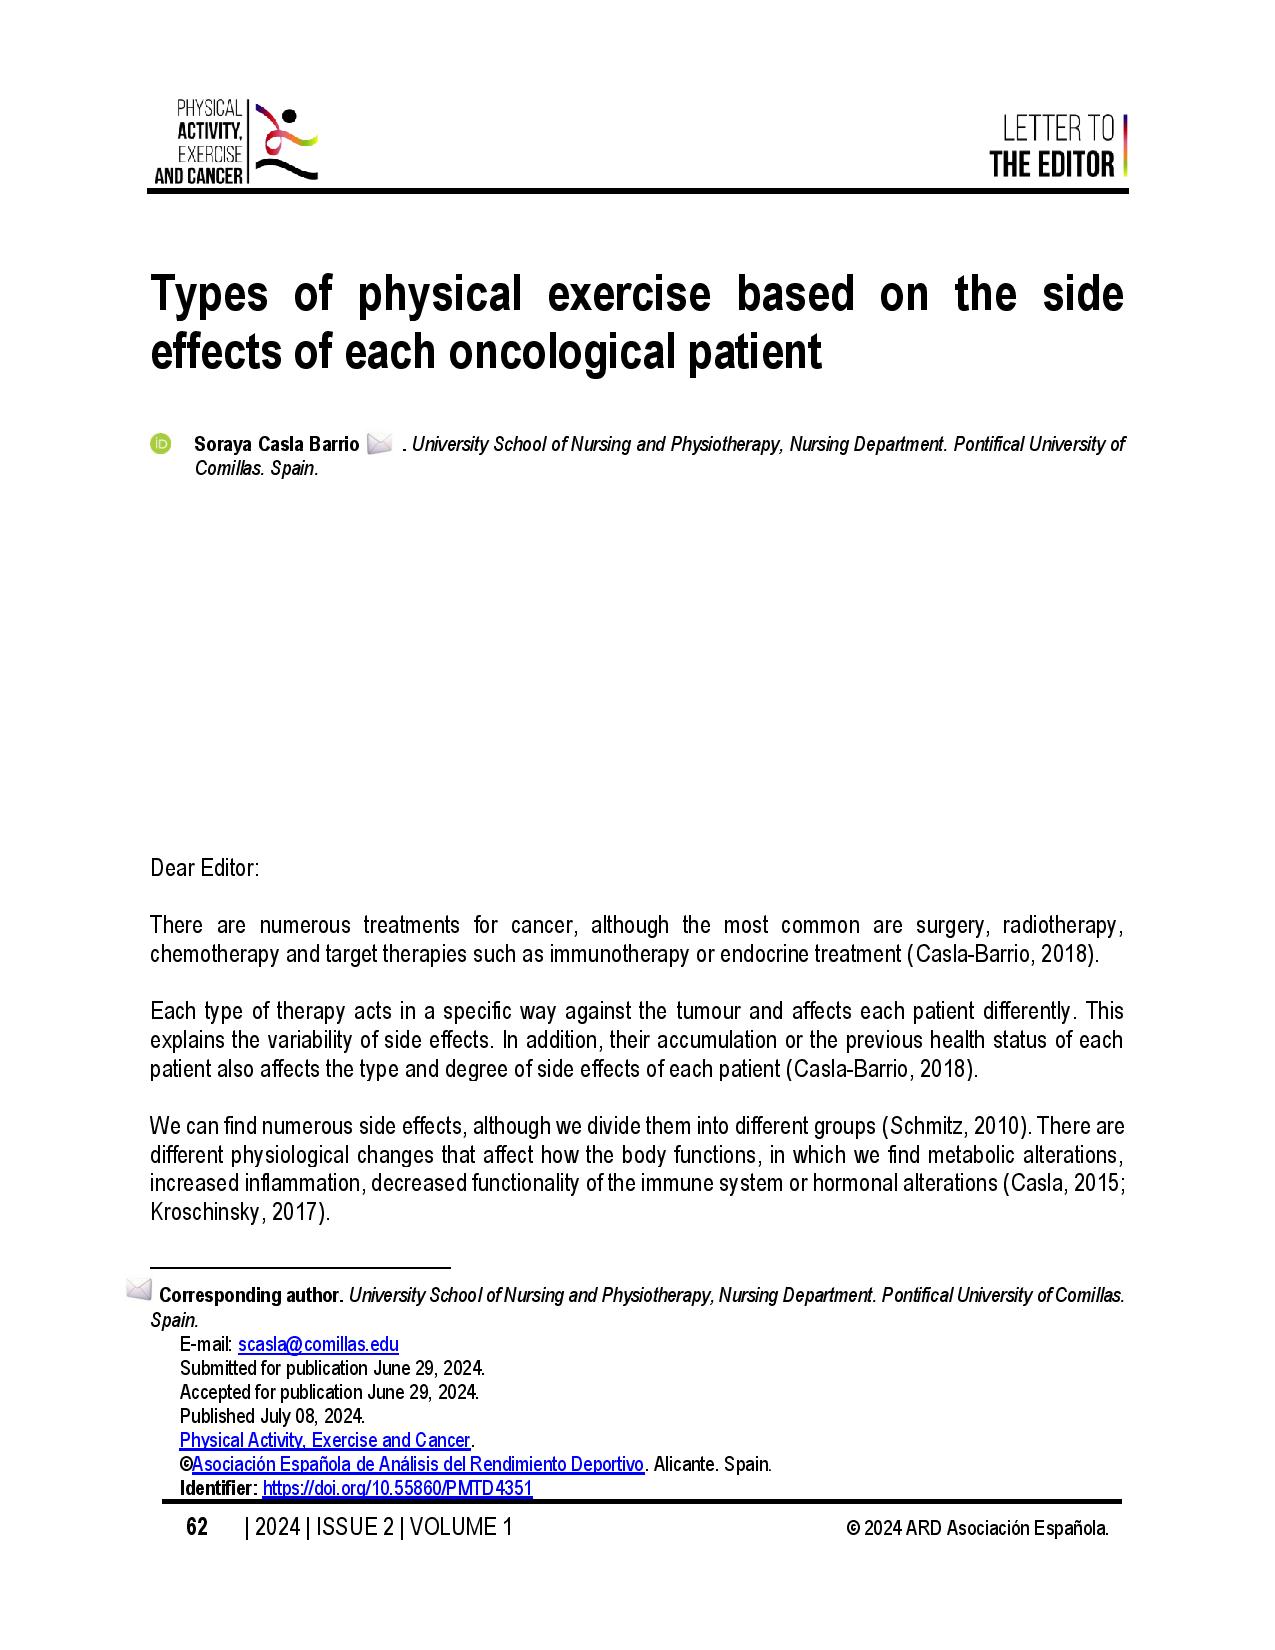 Types of physical exercise based on the side effects of each oncological patient